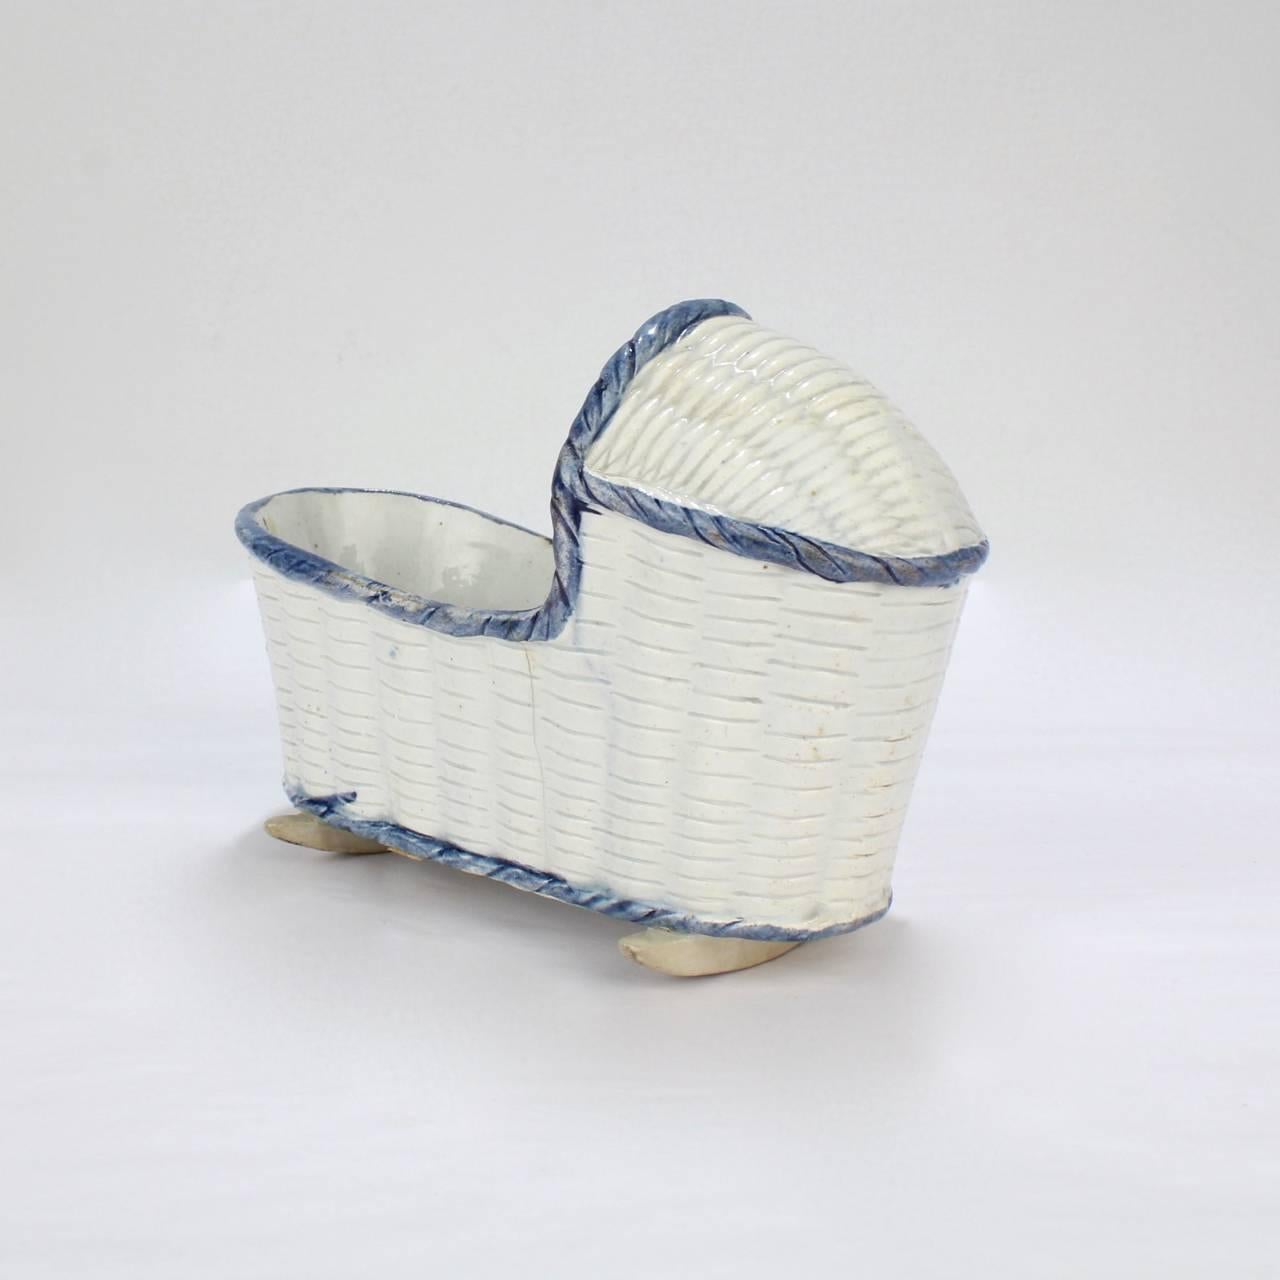 A rare, large English pearlware or Staffordshire pottery cradle.

Decorated with an overall basketweave pattern and blue highlights,

circa 1800.

Measures: Length ca. 5 5/8 in.

Items purchased from this dealer must delight you. Purchases